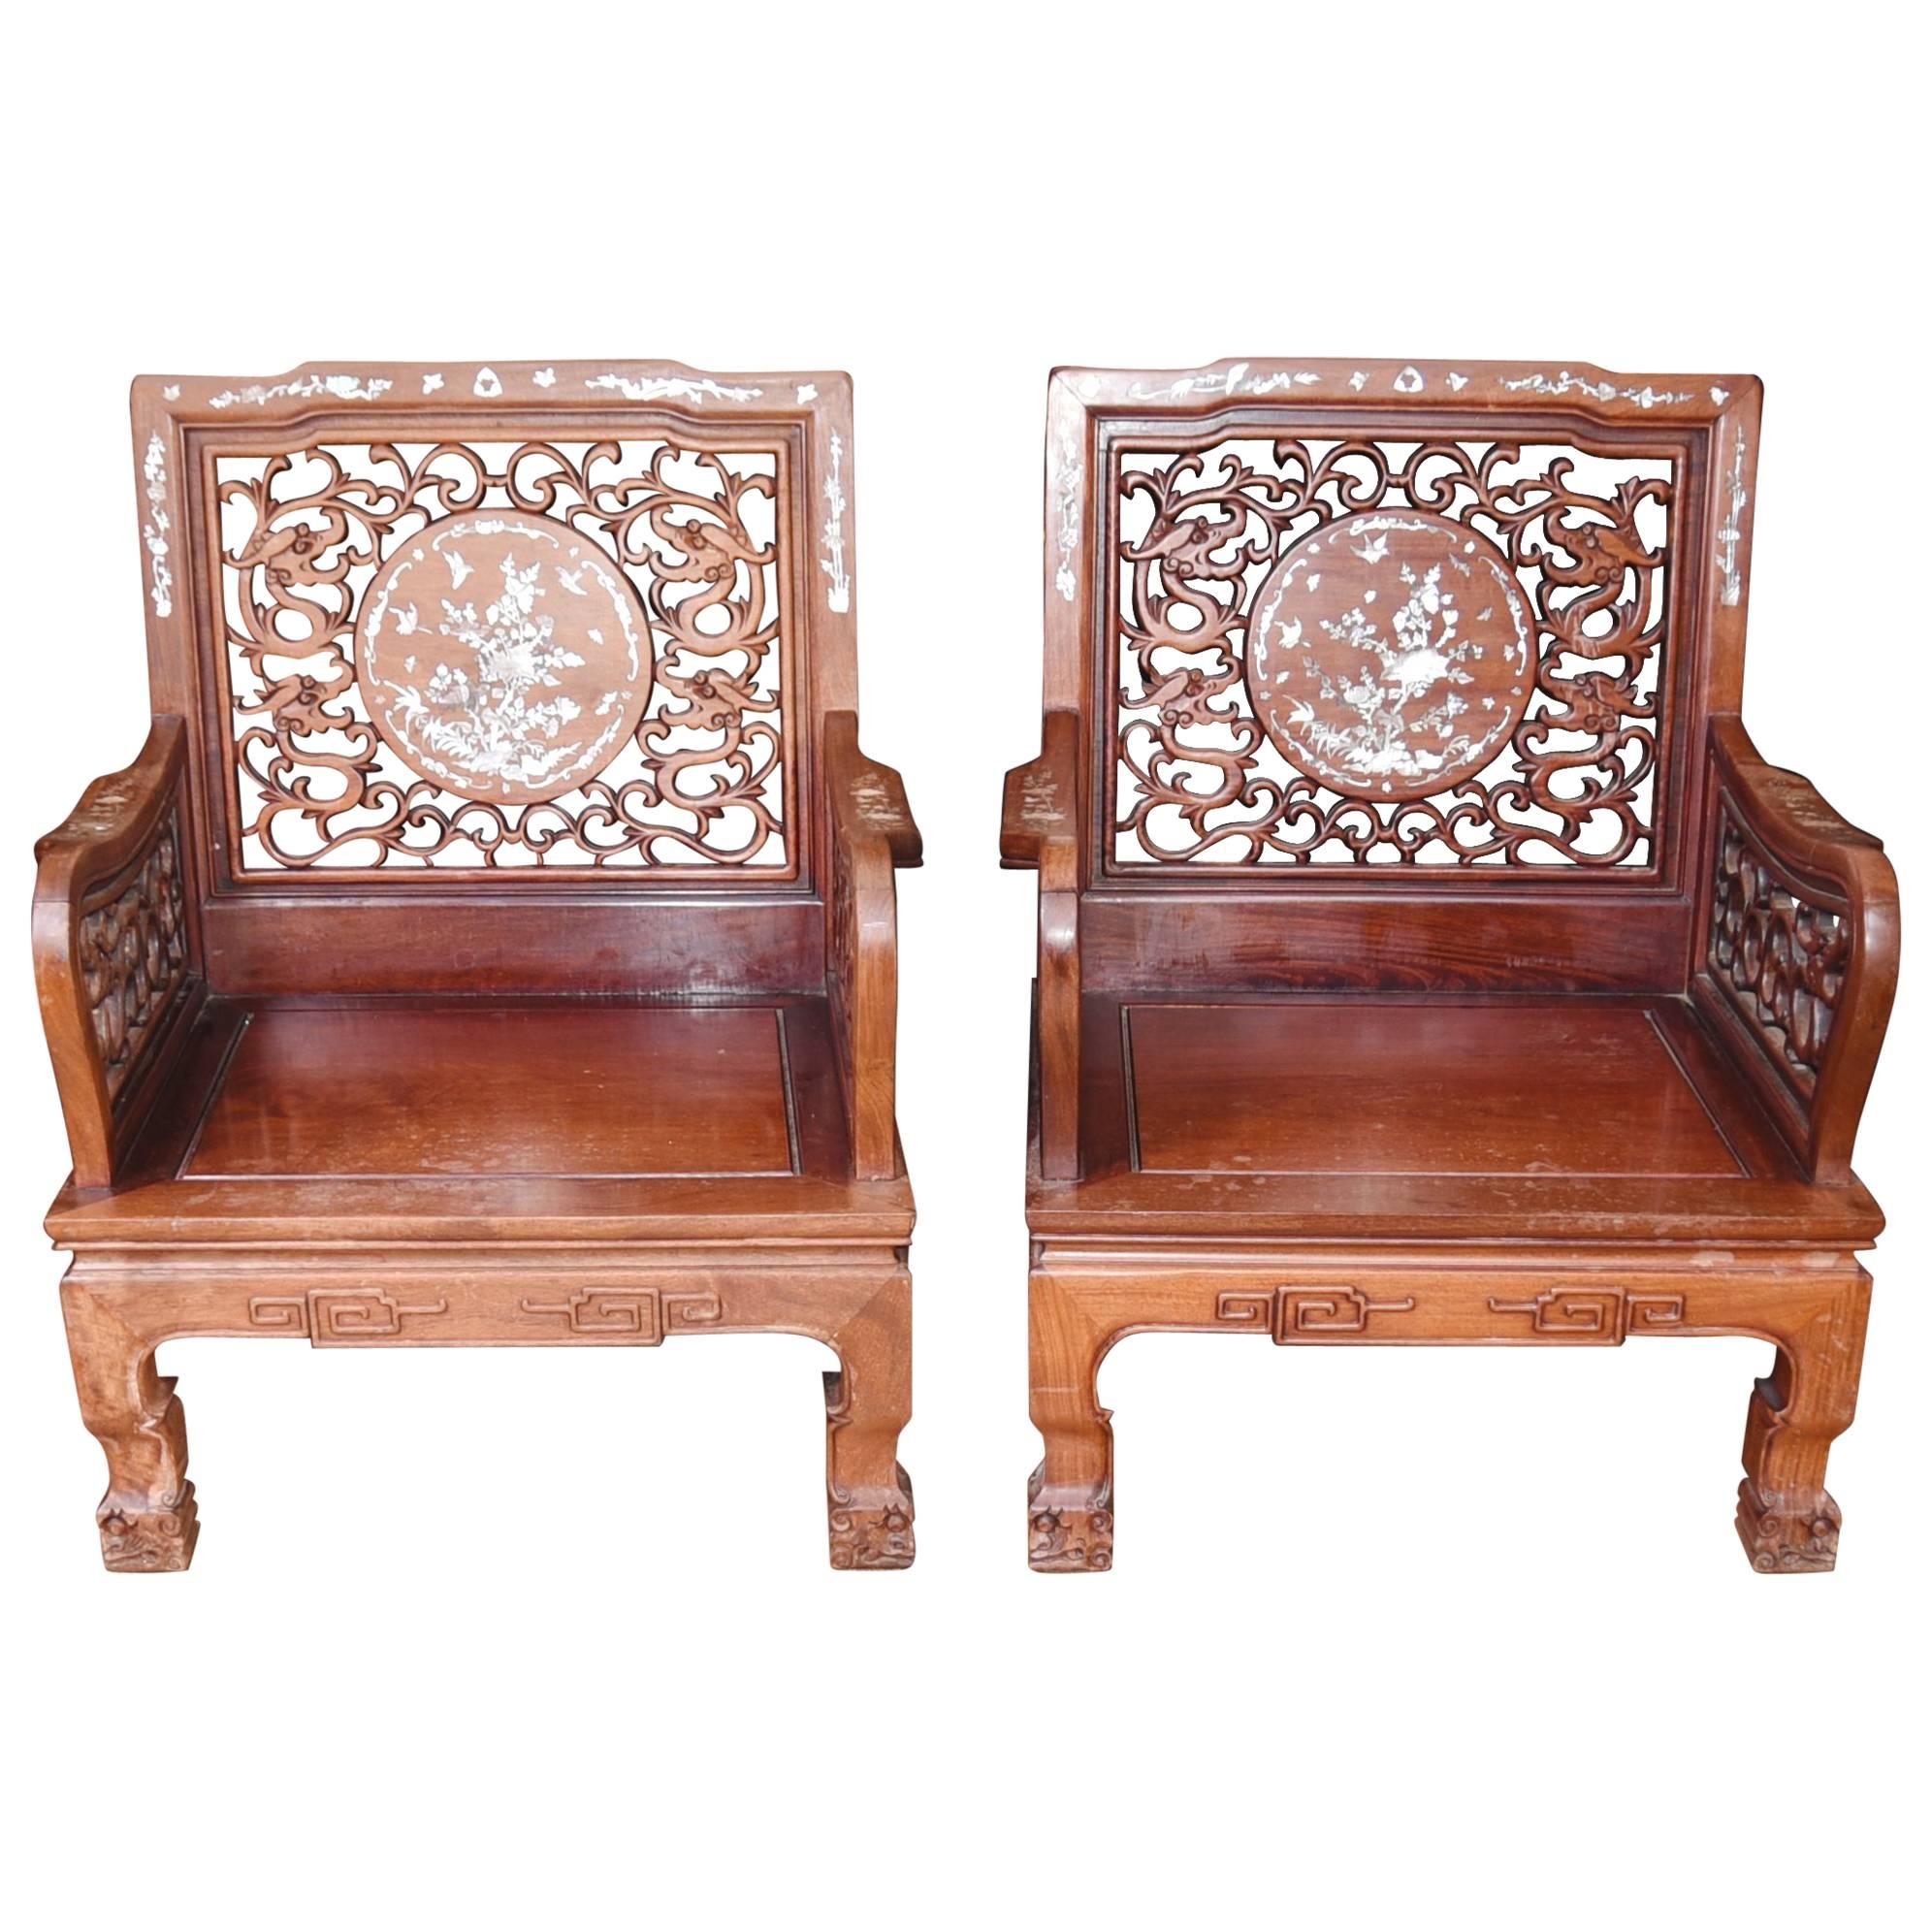 Pair of Antique Chinese Hardwood Armchairs Mother-of-Pearl Inlay Chair For Sale